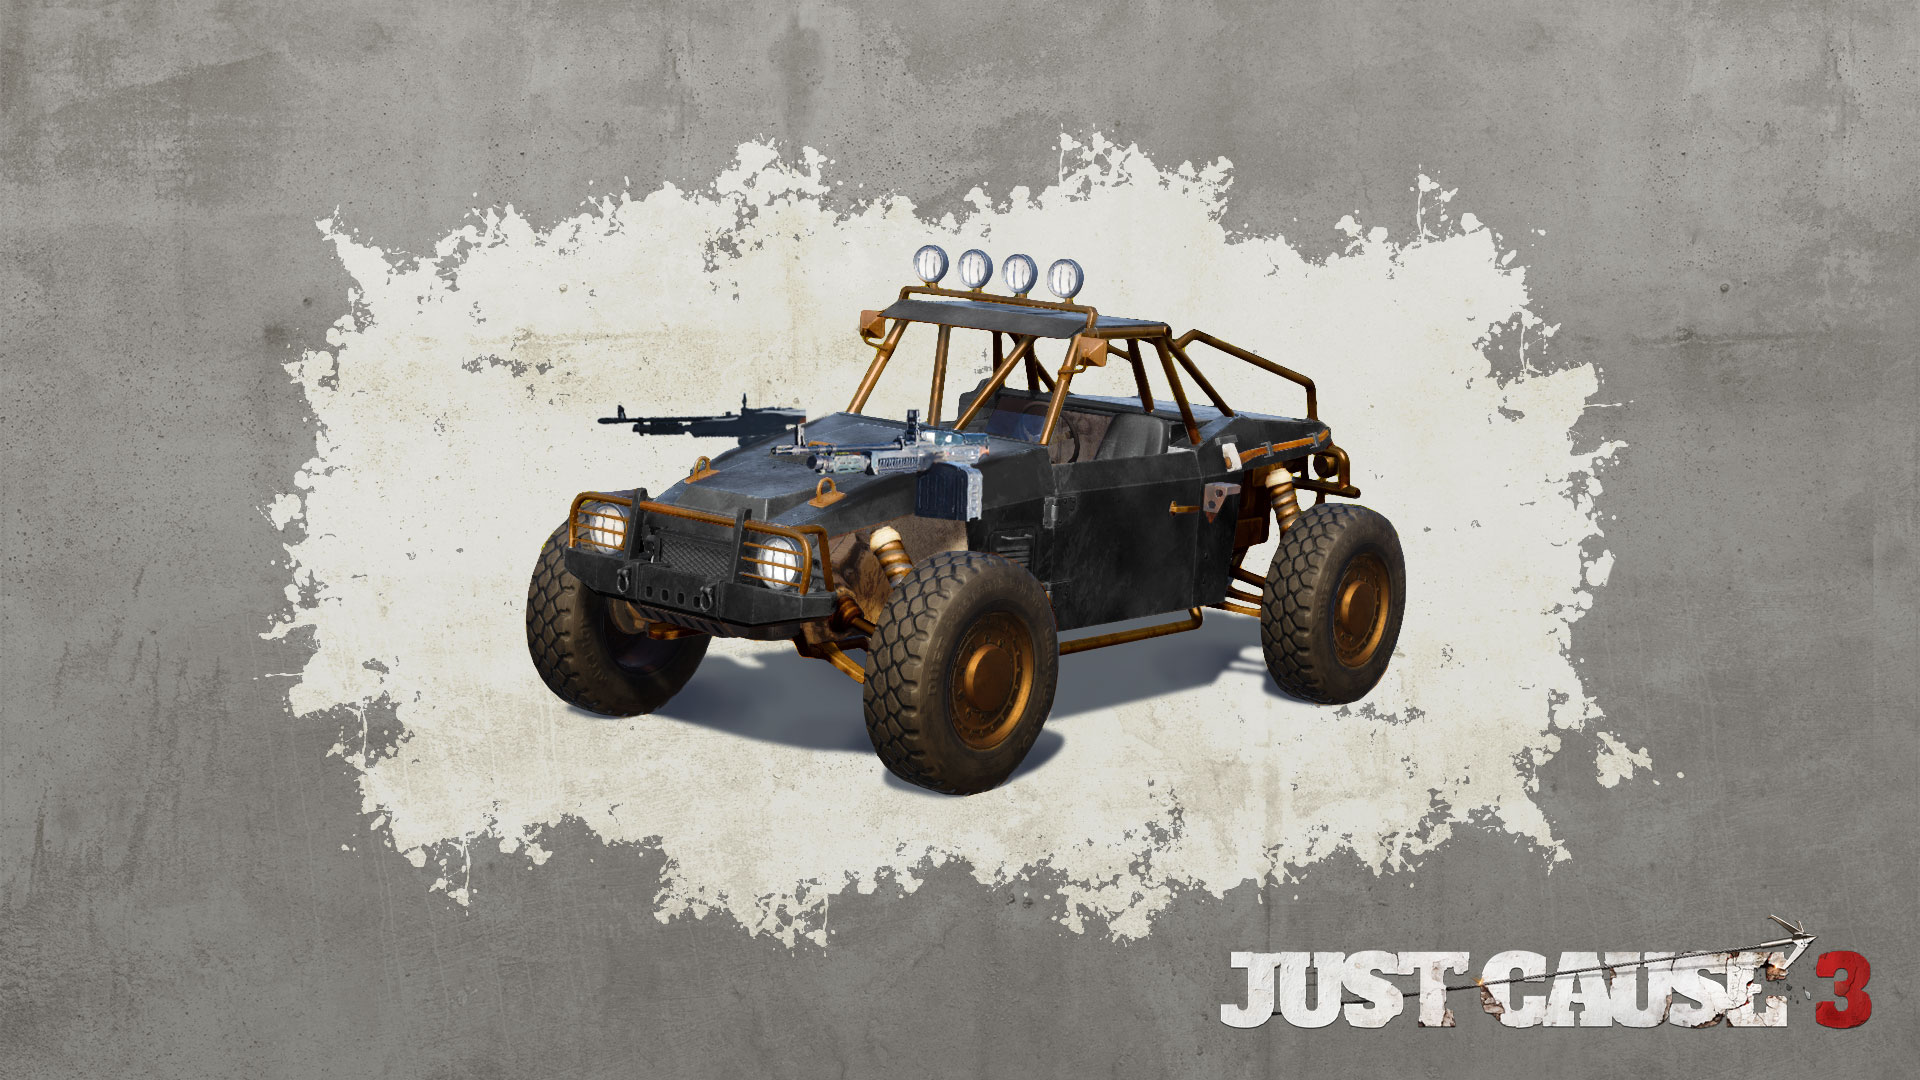 Just Cause 3 - Combat Buggy DLC Steam CD Key